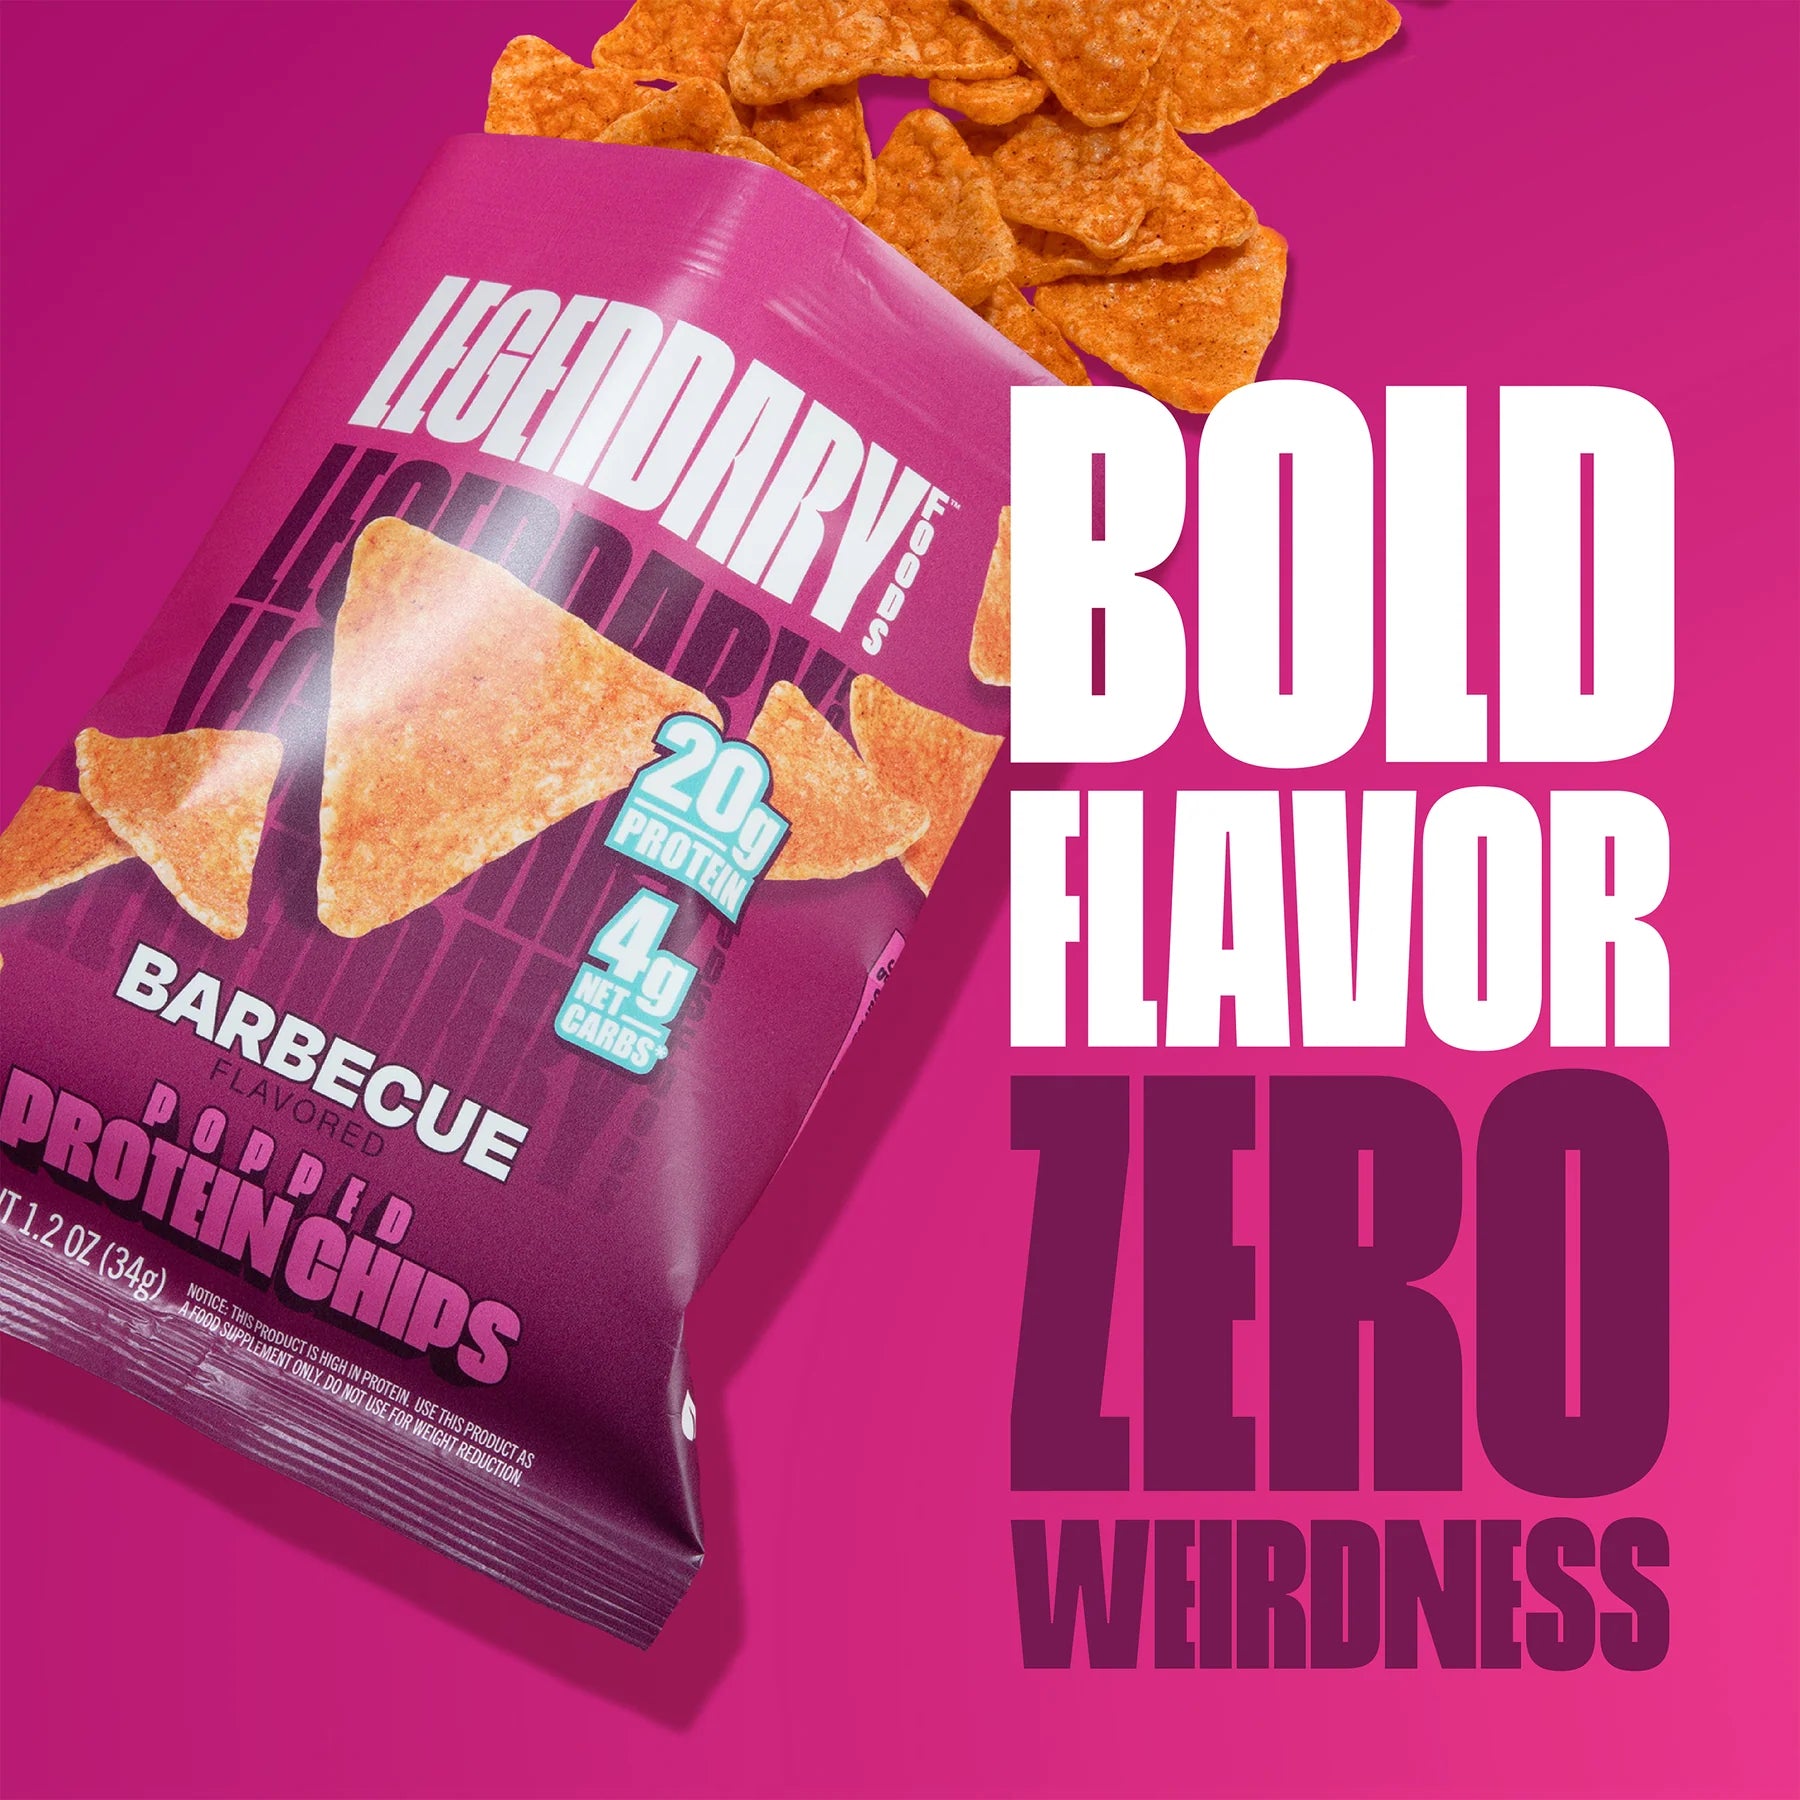 Legendary Foods Popped Protein Chips (1 bag)